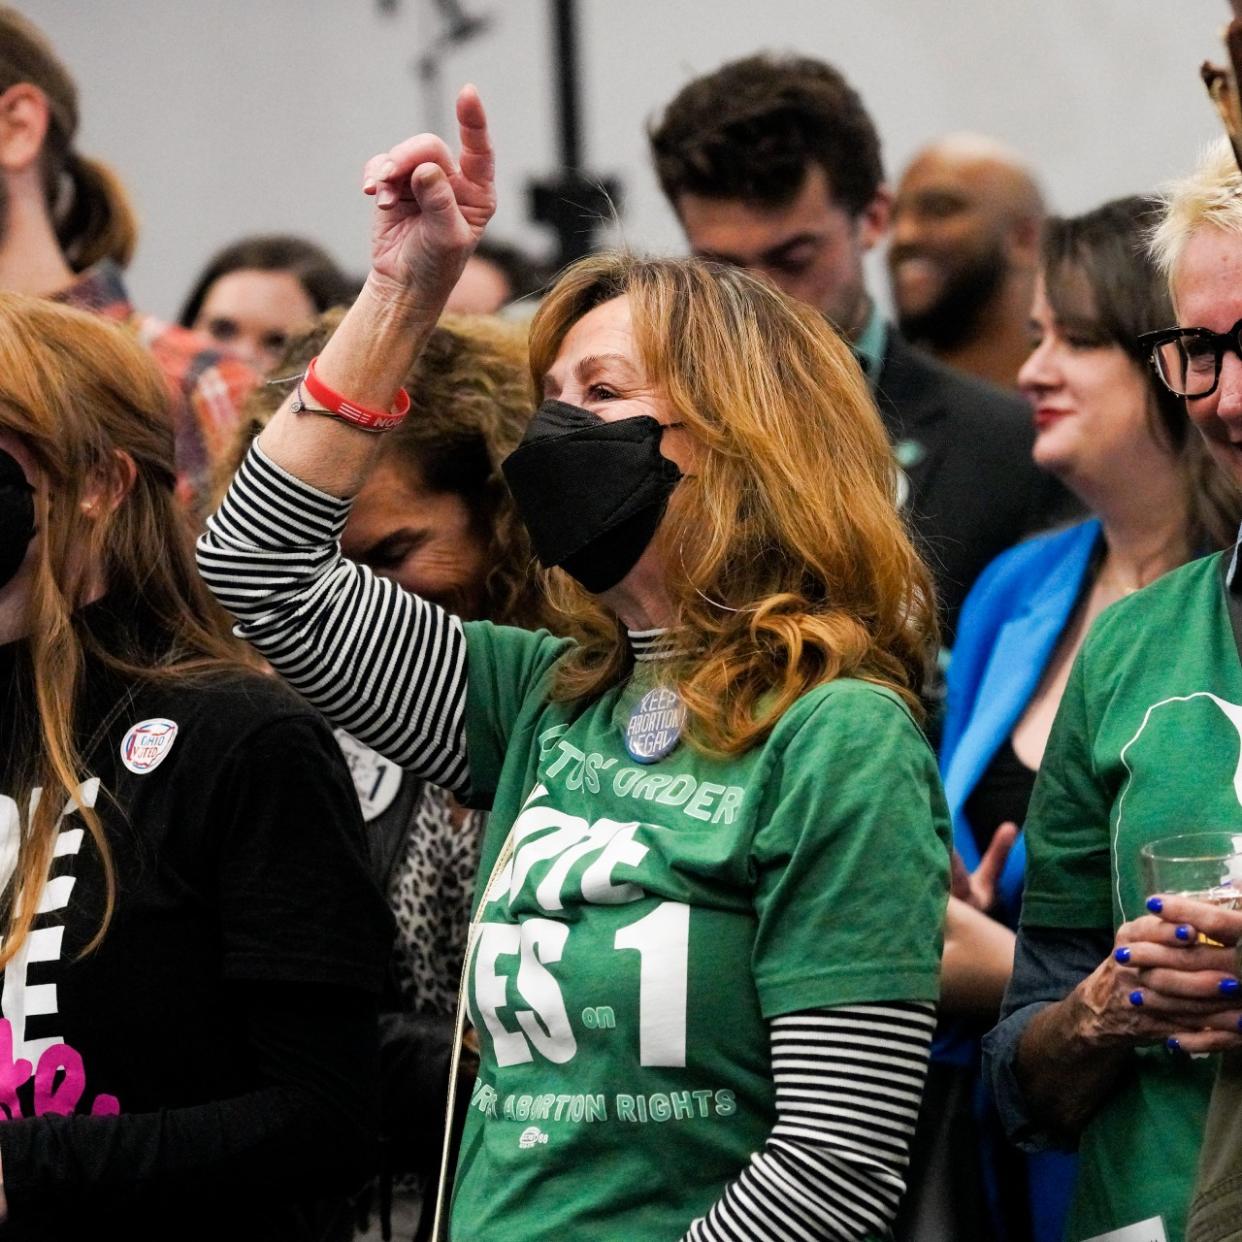  Supporters of Ohio Issue 1 cheer as results come in at a watch party hosted by Ohioans United for Reproductive Rights on November 7, 2023 in Columbus, Ohio. . 